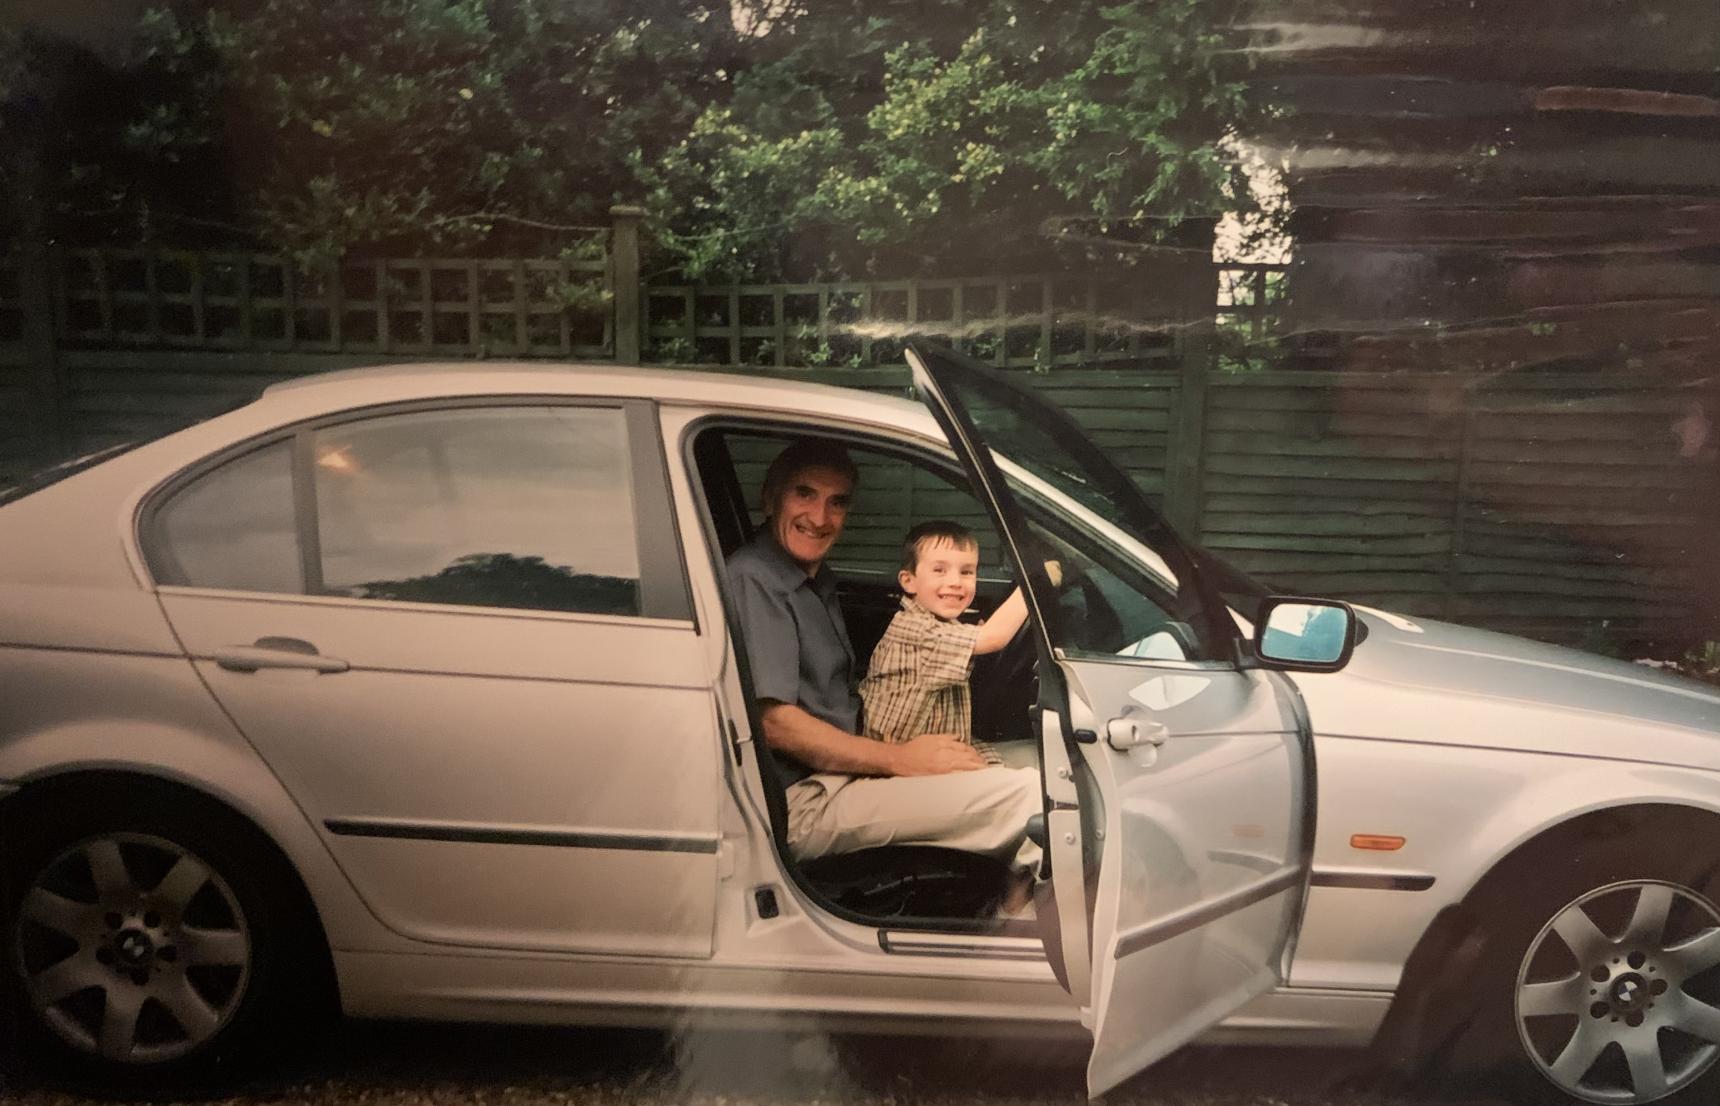 Tom as a young boy on his Grandad's knee, steering his car